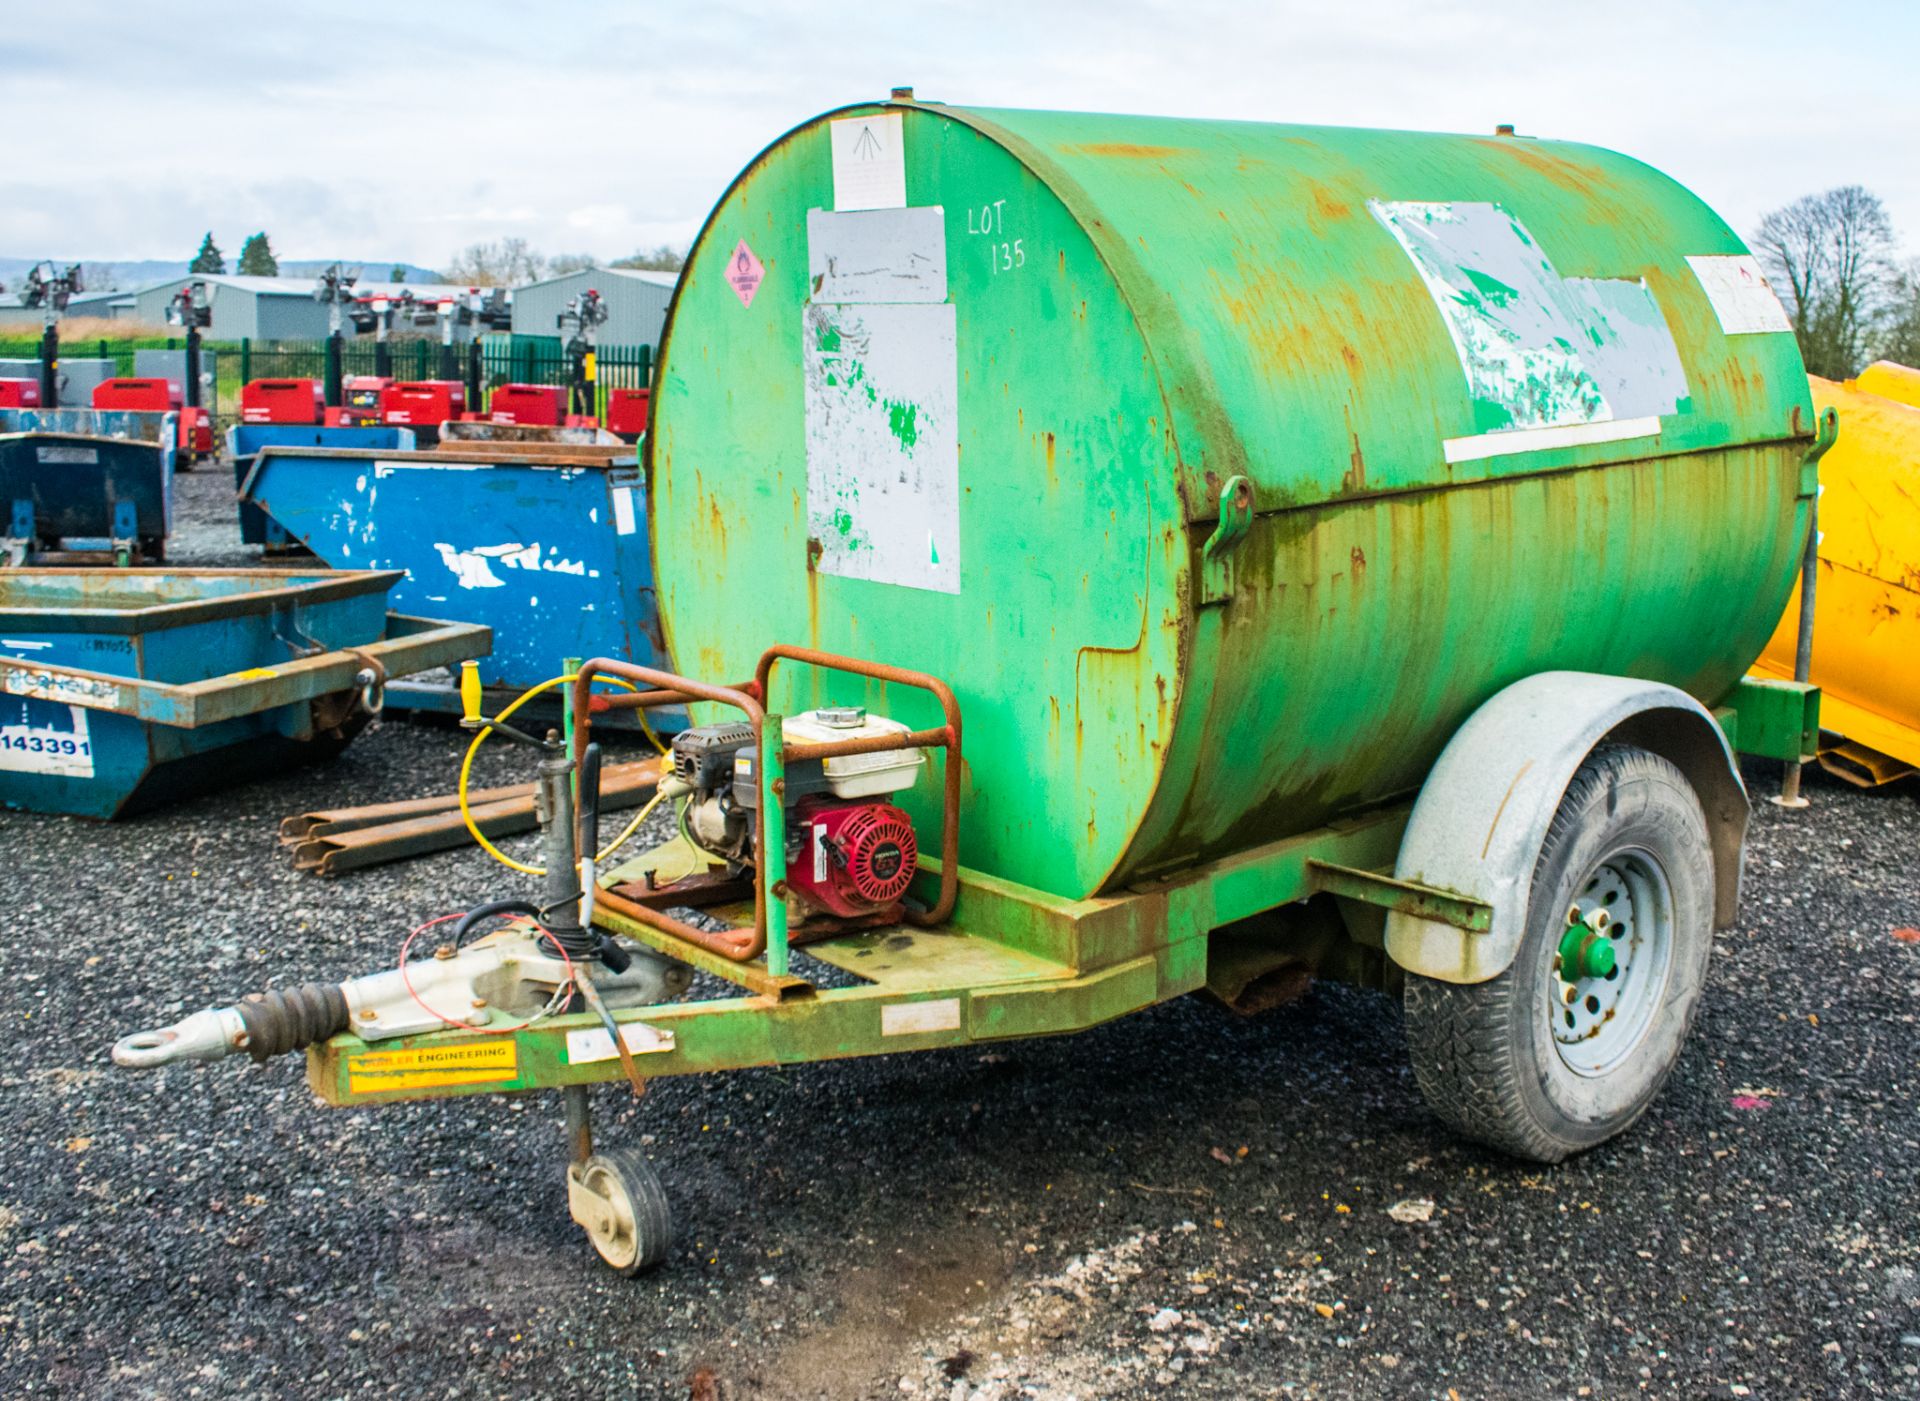 Trailer Engineering 2140 litre fast tow bunded fuel bowser c/w petrol driven generator, electric